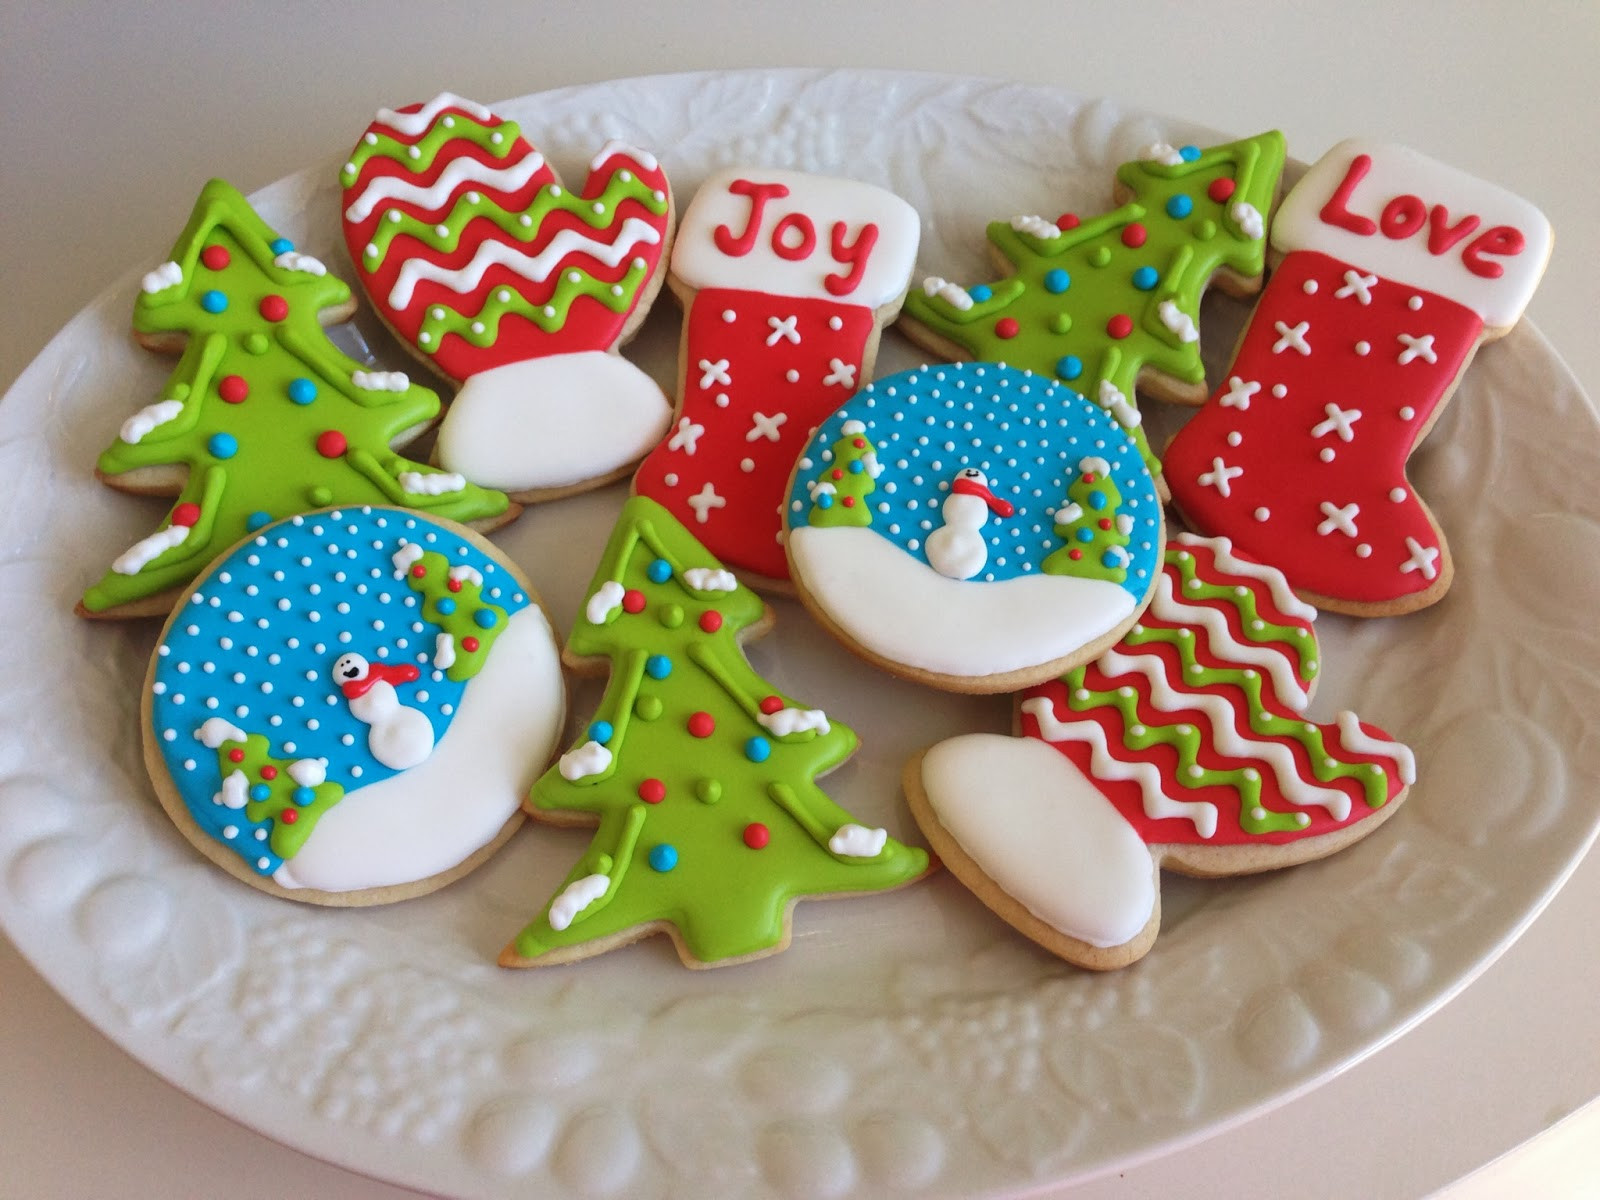 Christmas Sugar Cookie Icing Recipes
 monograms & cake Christmas Cut Out Sugar Cookies with